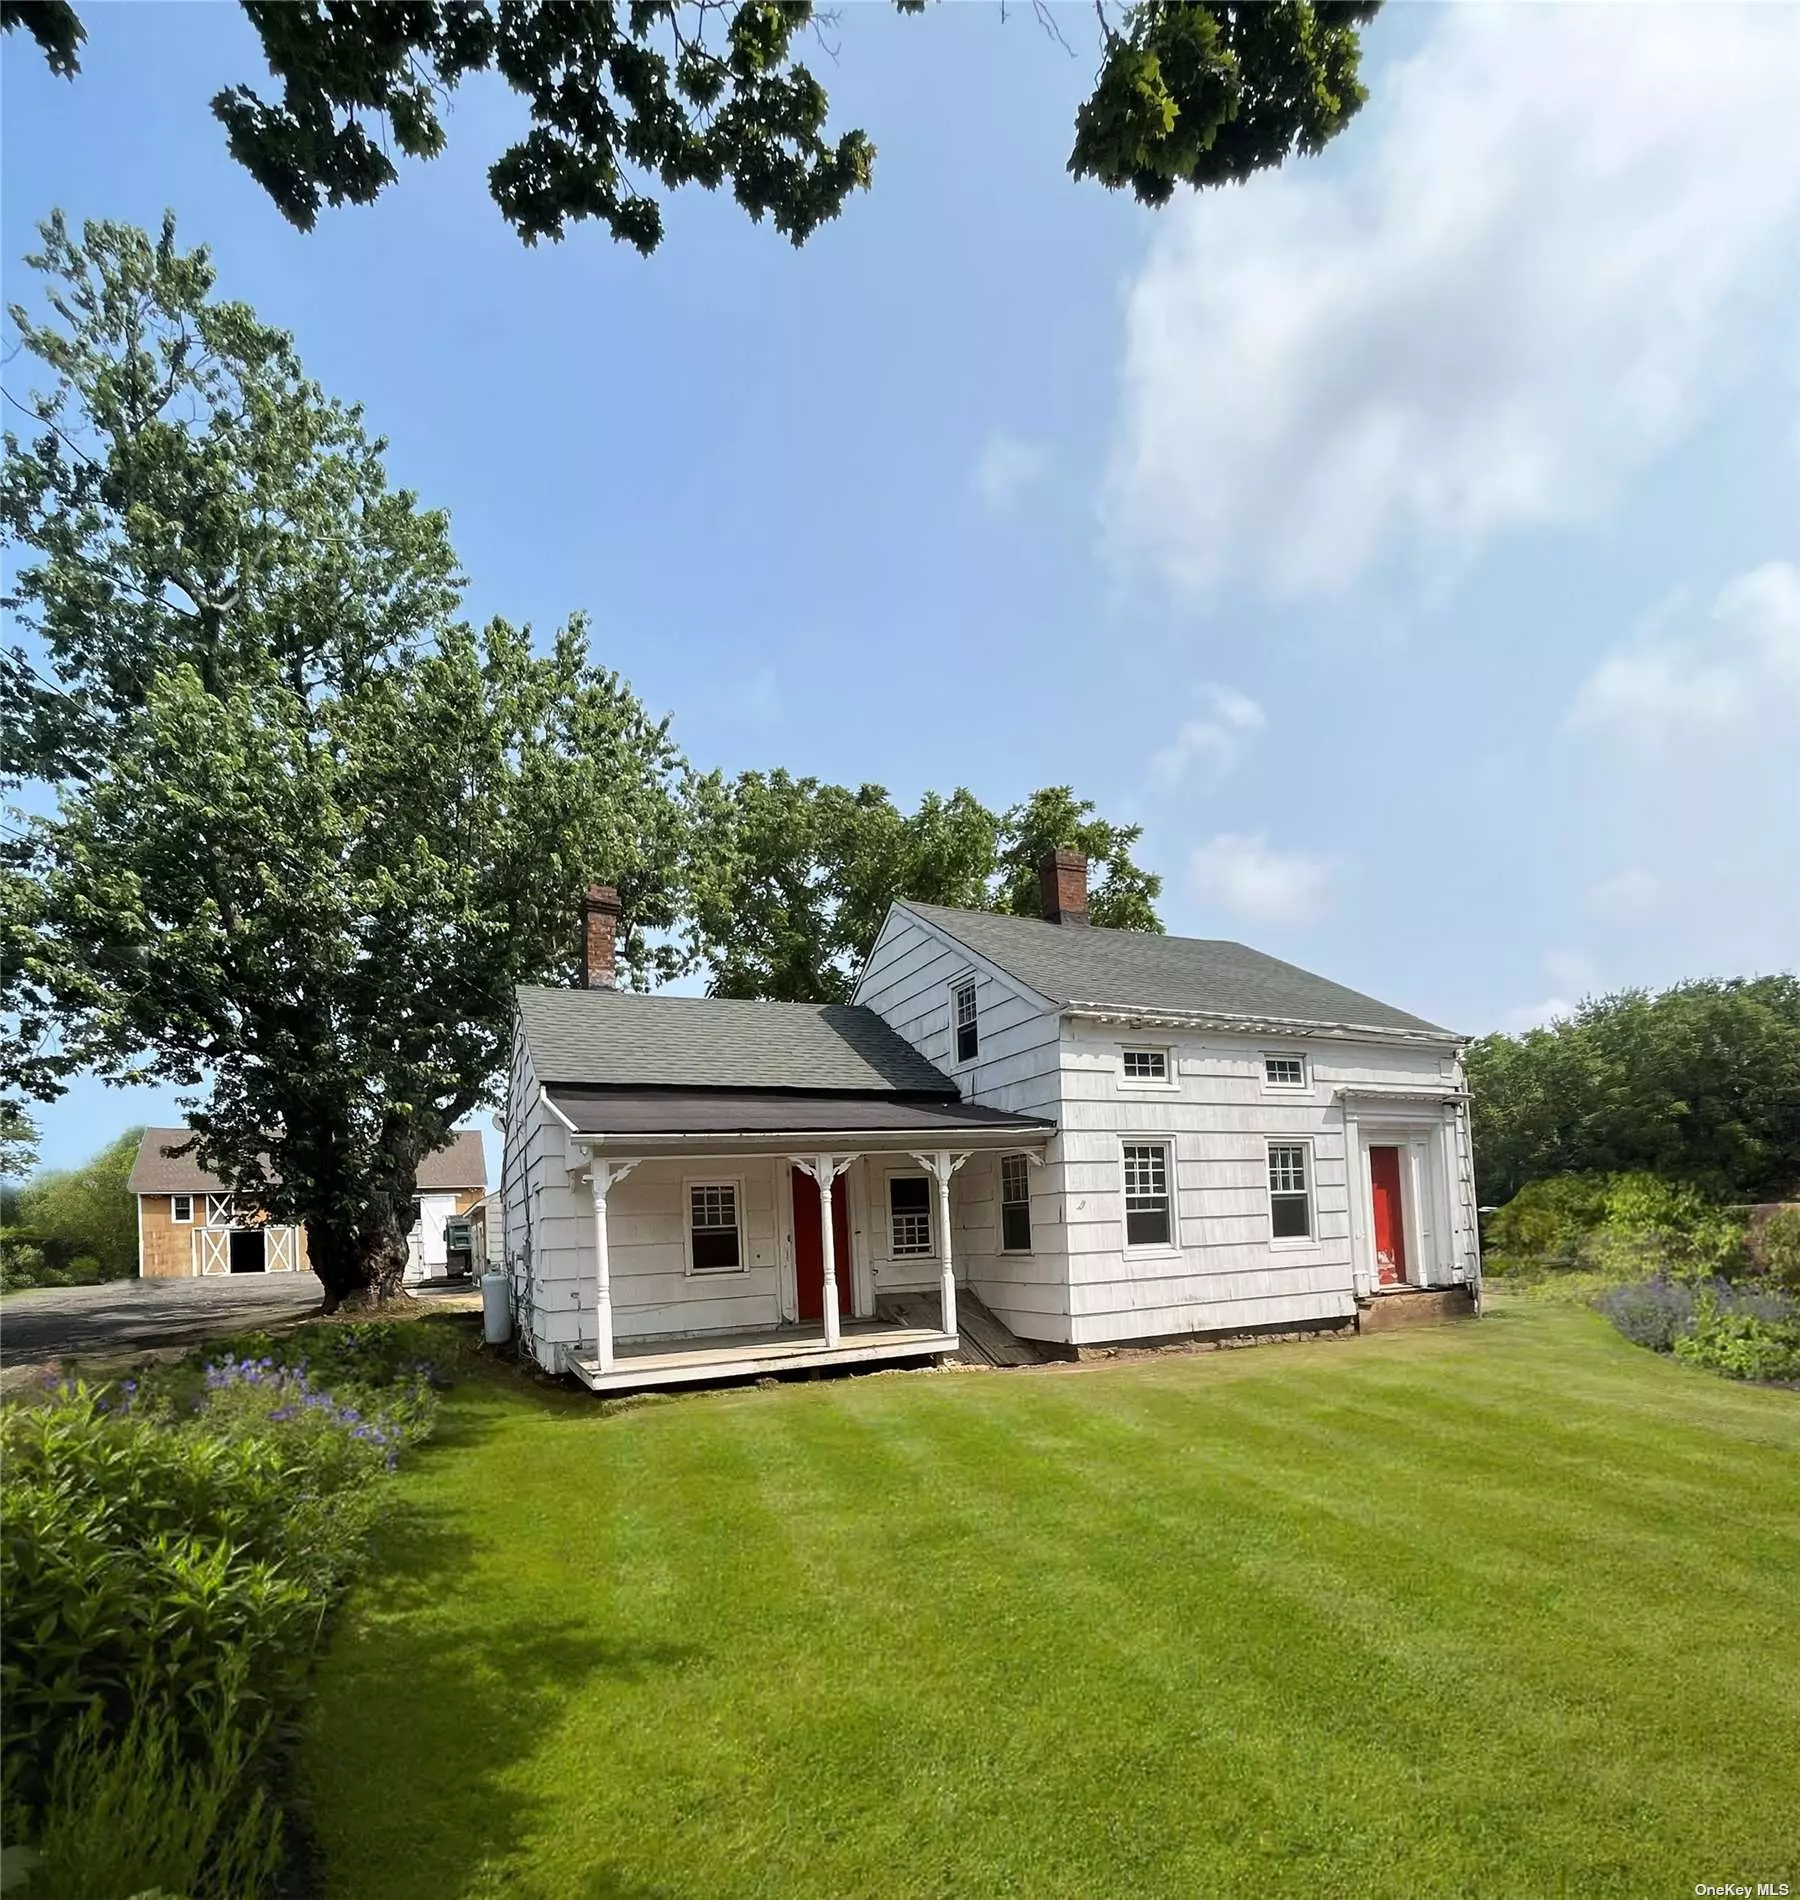 Restored and rejuvenated. This beloved 24 acre North Fork homestead features a charming white farmhouse with 3 bedrooms, 2 bathrooms (to be renovated or can build to suit) on 24 acres with 5 accessory buildings. 4 barns and a 2 car garage. Barn 1 is a 2, 400 Square Foot, 2 Story Barn (50x30), Barn 2 is 20x30 single story built in 2015 and two 400 sqft accessory barns. This farm features two lots, 4.18 acres with 244&rsquo; of main road frontage and 20 acres of DRS agricultural land with 2 irrigation wells. Zoned R-80, the front 4 acres can be subdivided into 2 parcels and there is an approved commercial use of riding academy for the equestrian buyer. Owner is builder and will customize as residential, farm winery with vineyard or equestrian site. Room for pond, pool, tennis, pickleball or sunken riding ring and stables.